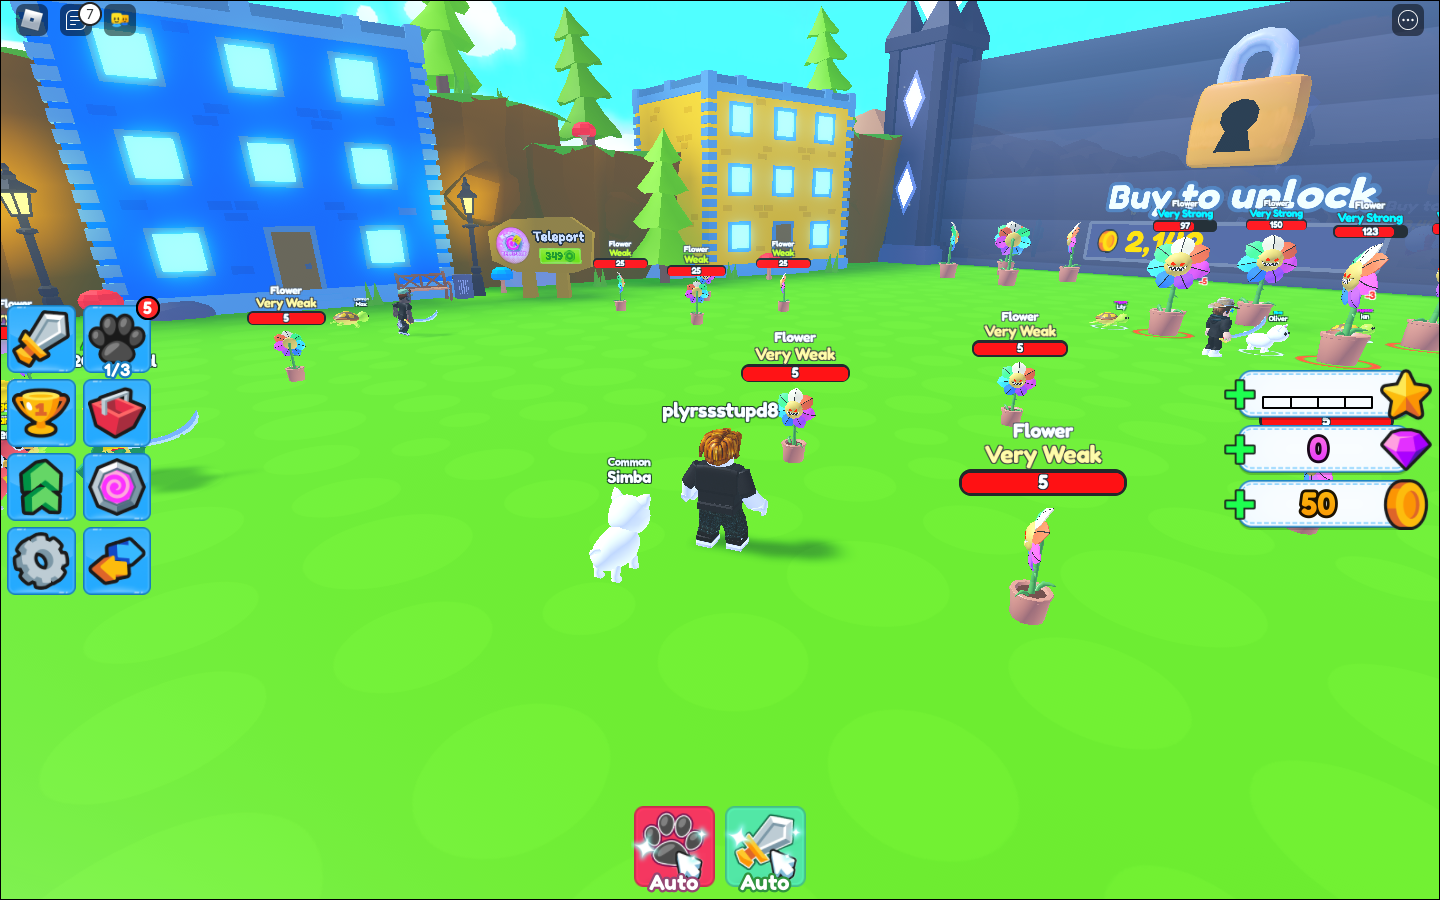 All Pet Fighting Simulator Codes(Roblox) - Tested October 2022